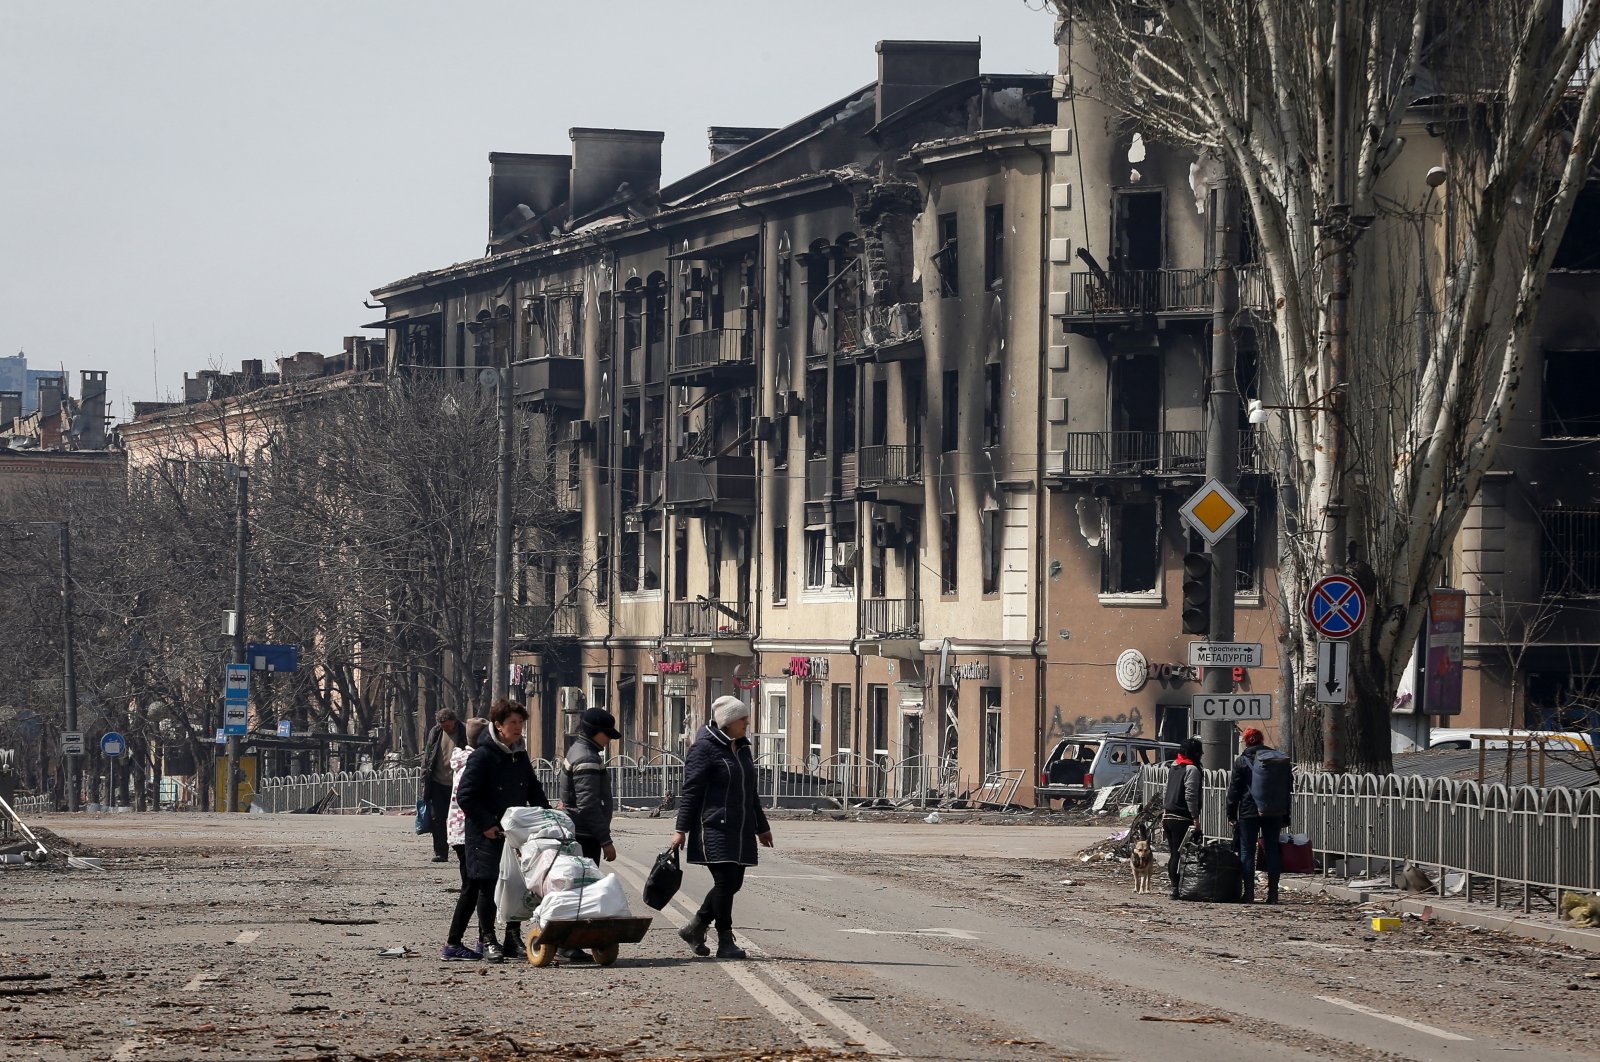 Residents carry their belongings across a street near a building burnt in the course of the Ukraine-Russia conflict, in the southern port city of Mariupol, Ukraine, April 10, 2022. (Reuters Photo)